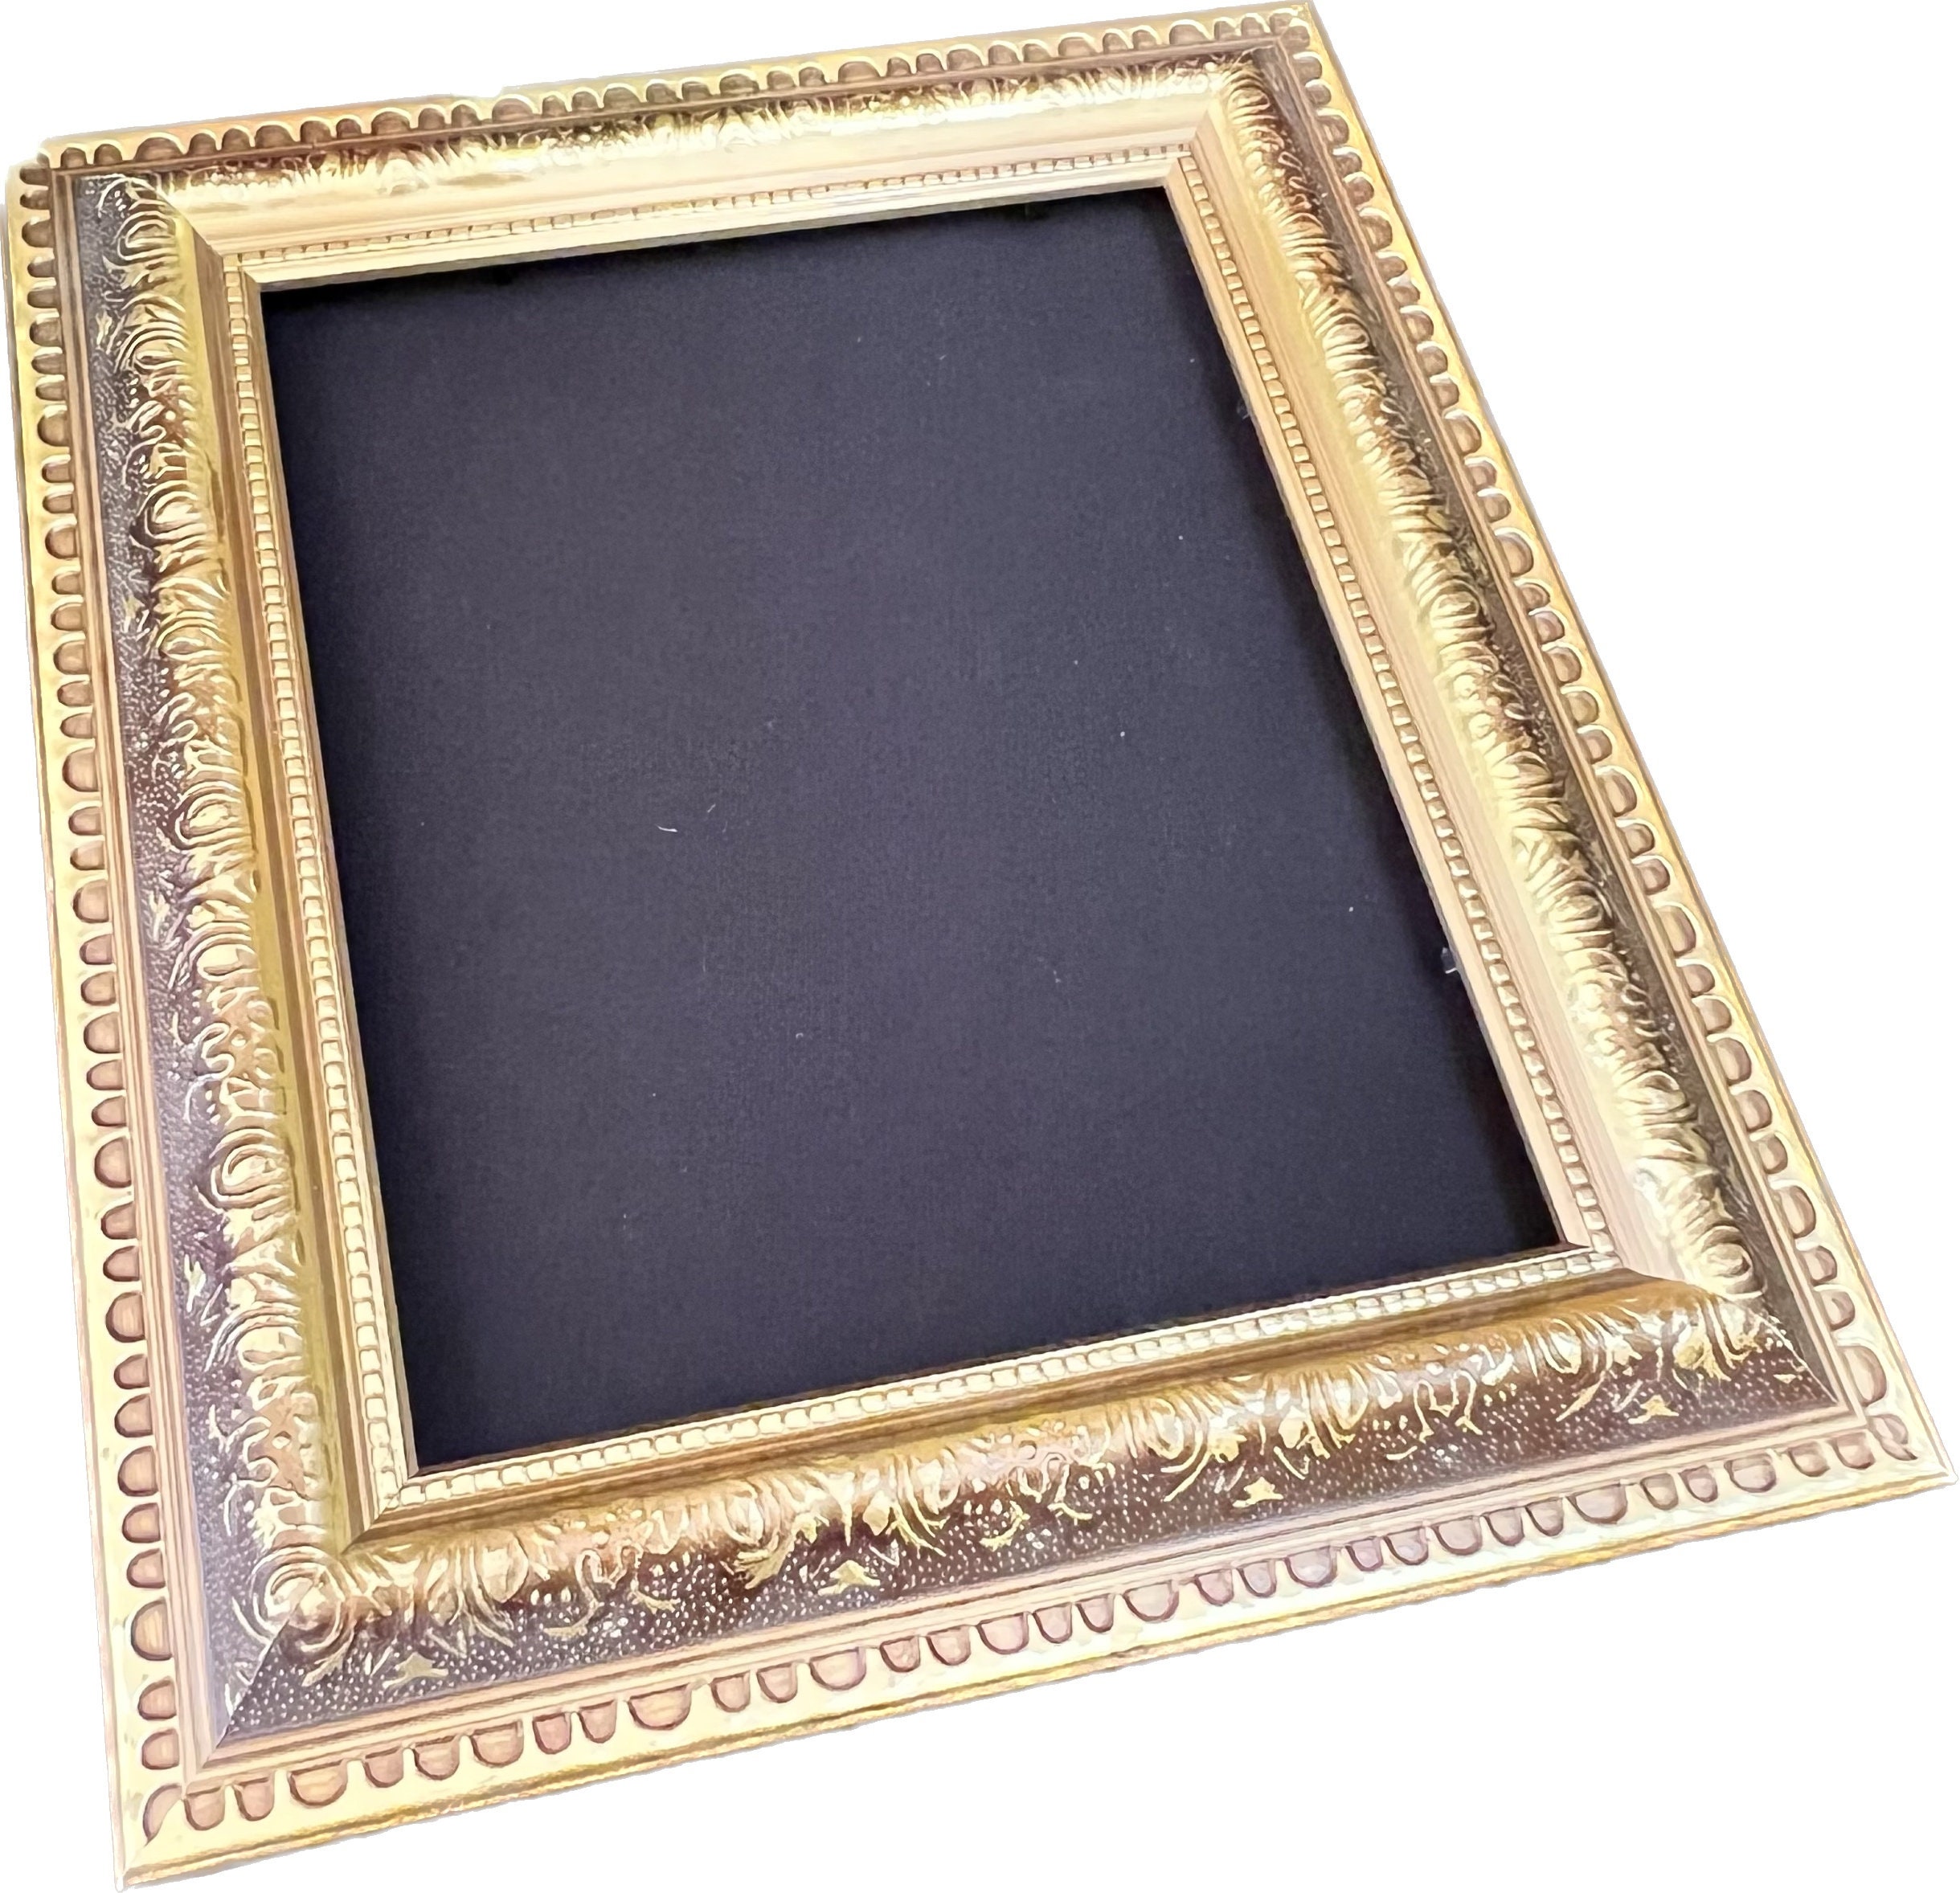 Creative Hobbies Synthetic Chalkboard with Unfinished Wood Frame 4 x 6 inch -Pack of 6 Chalkboards